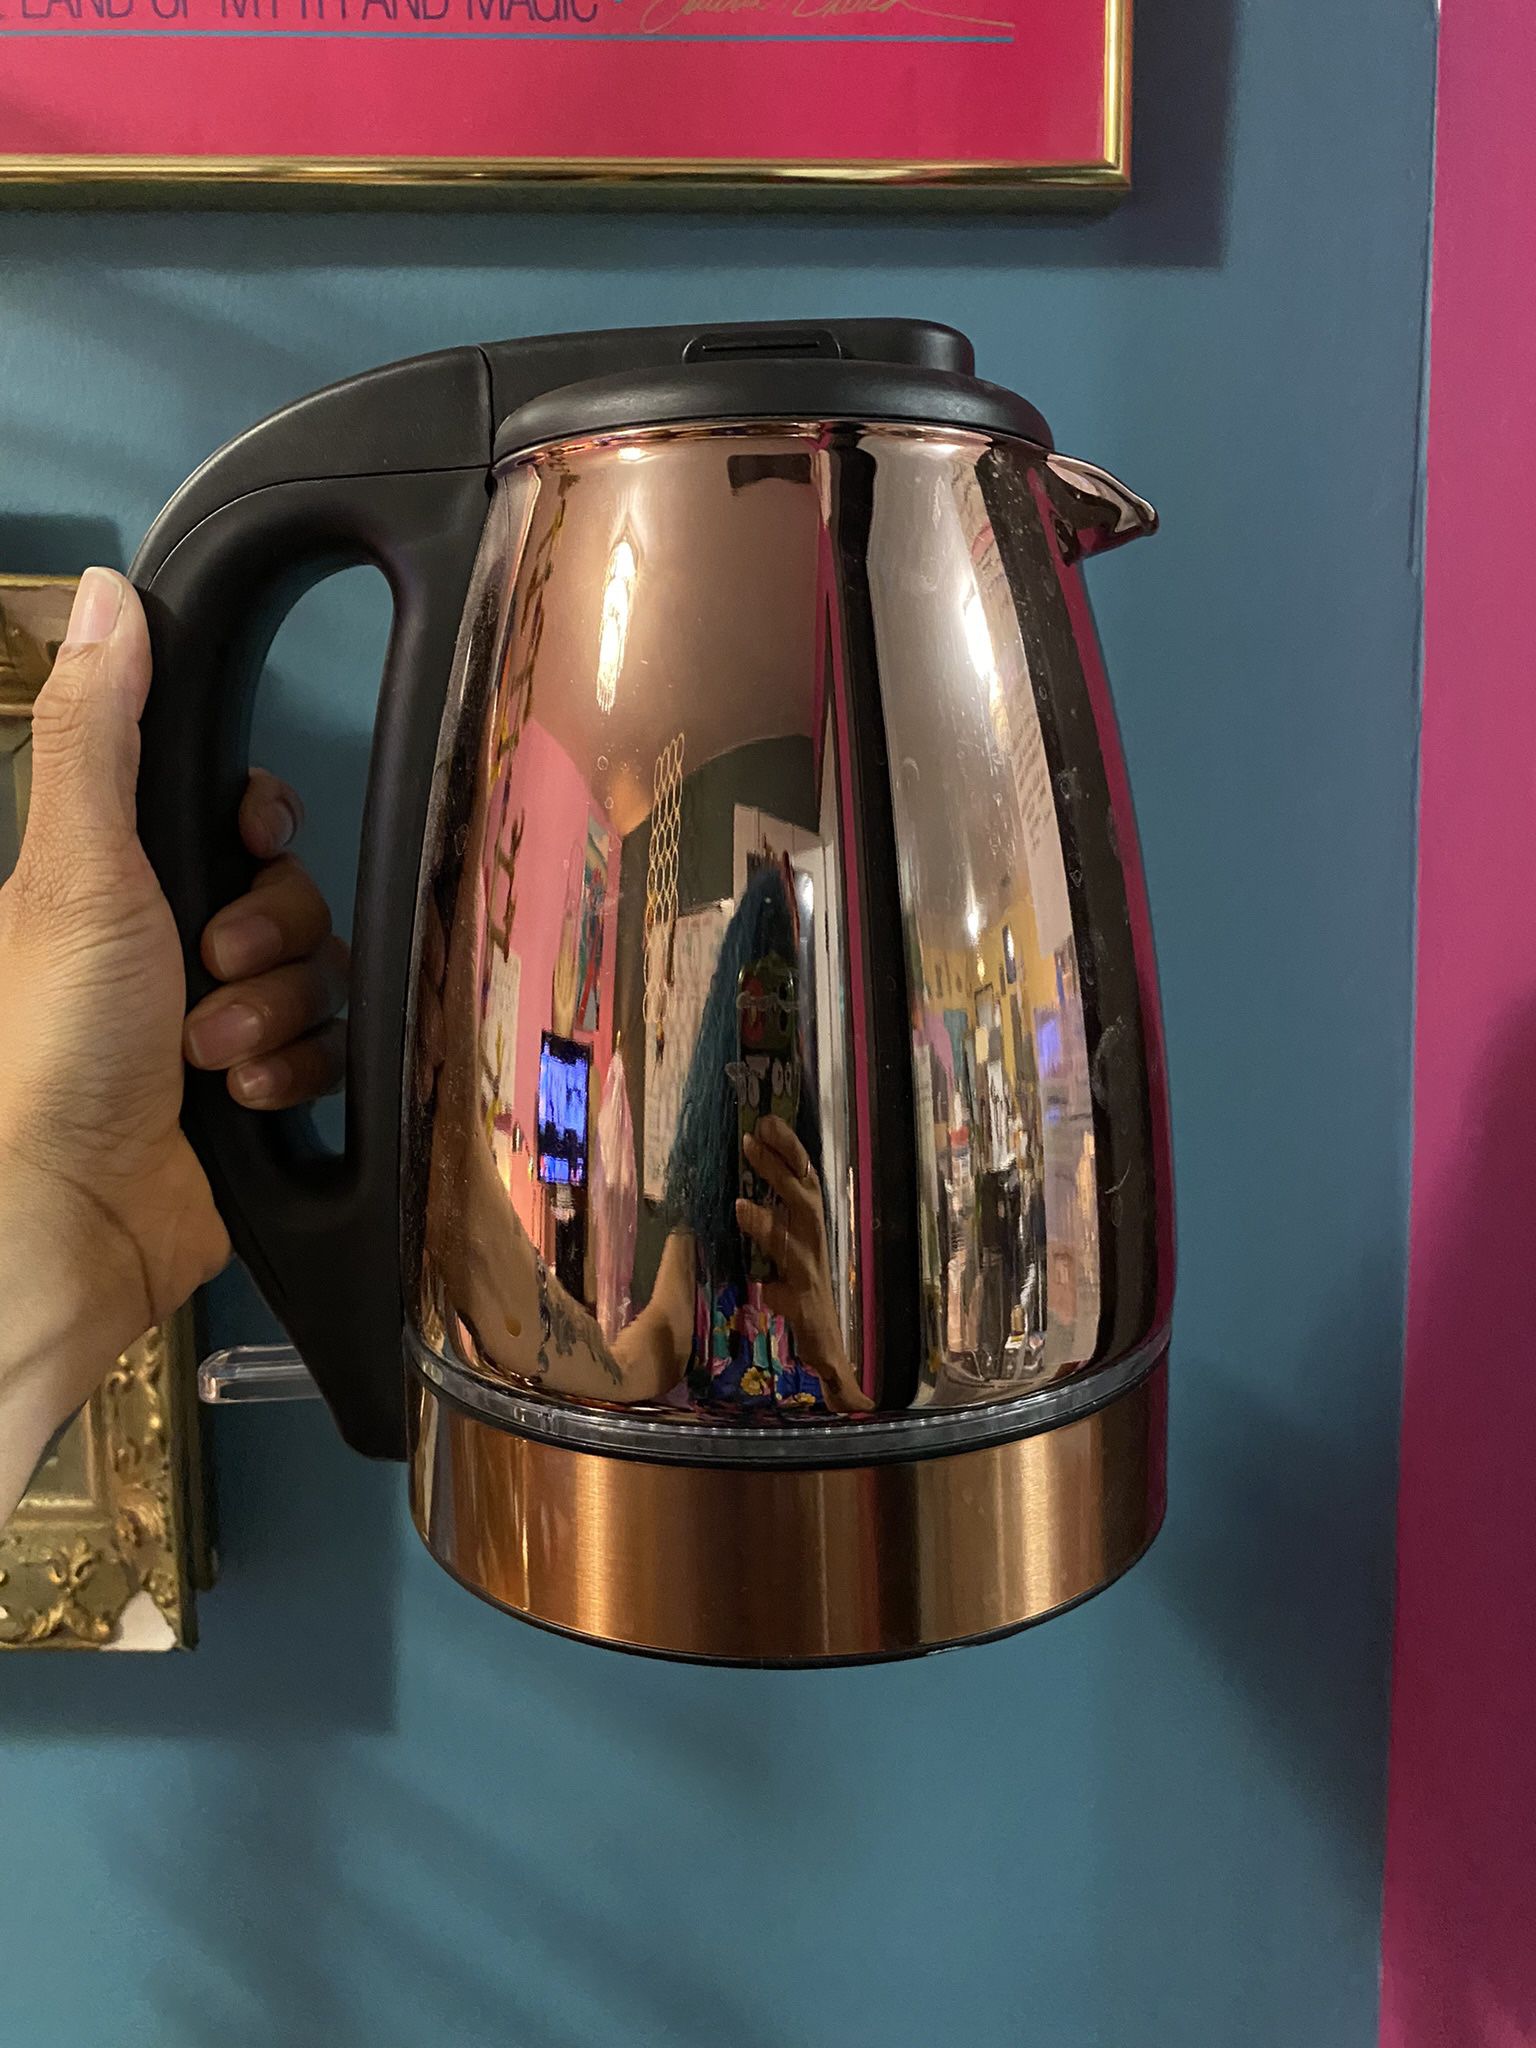 Breville Electric Kettle for Sale in Boston, MA - OfferUp